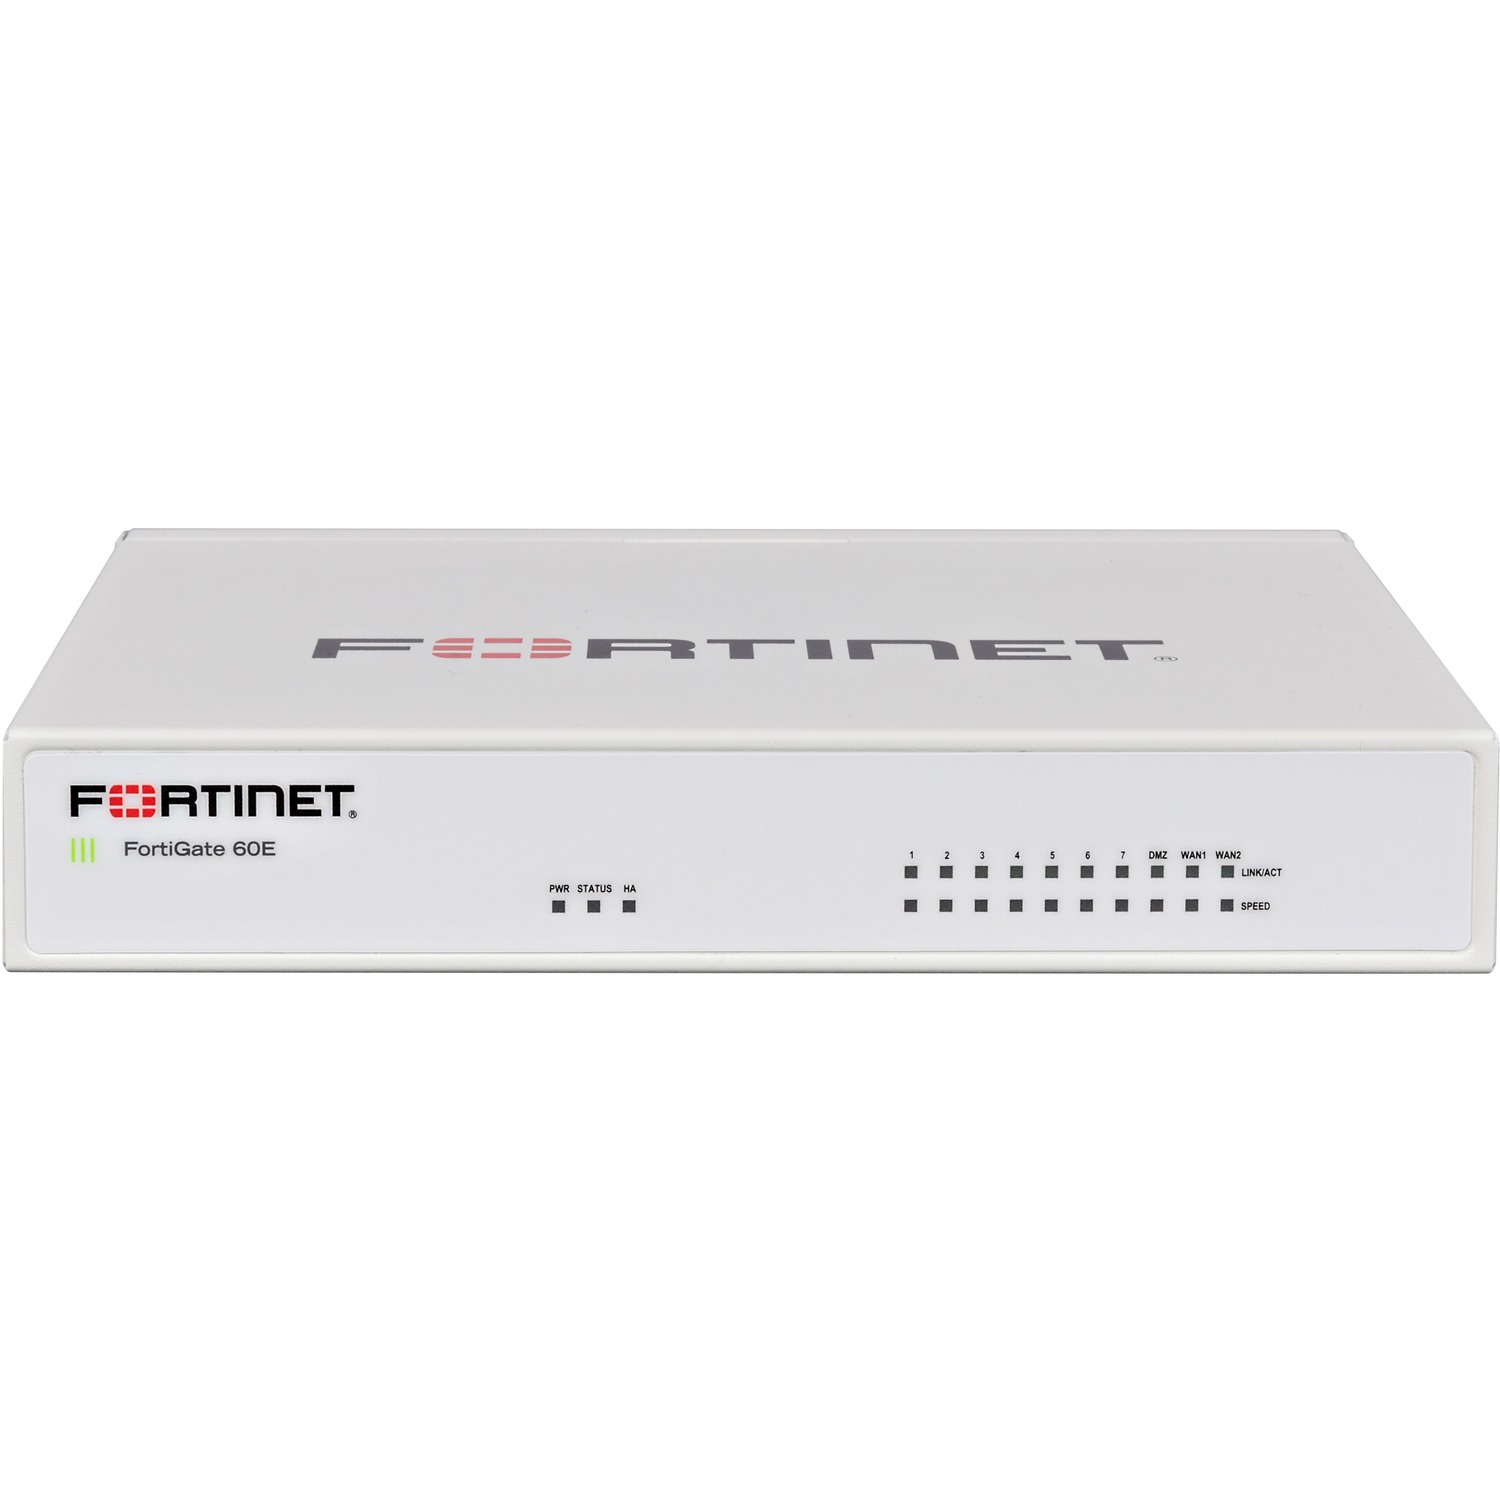 Fortinet FortiGate 60E Network Security/Firewall Appliance (fg-60e) - image 2 of 6